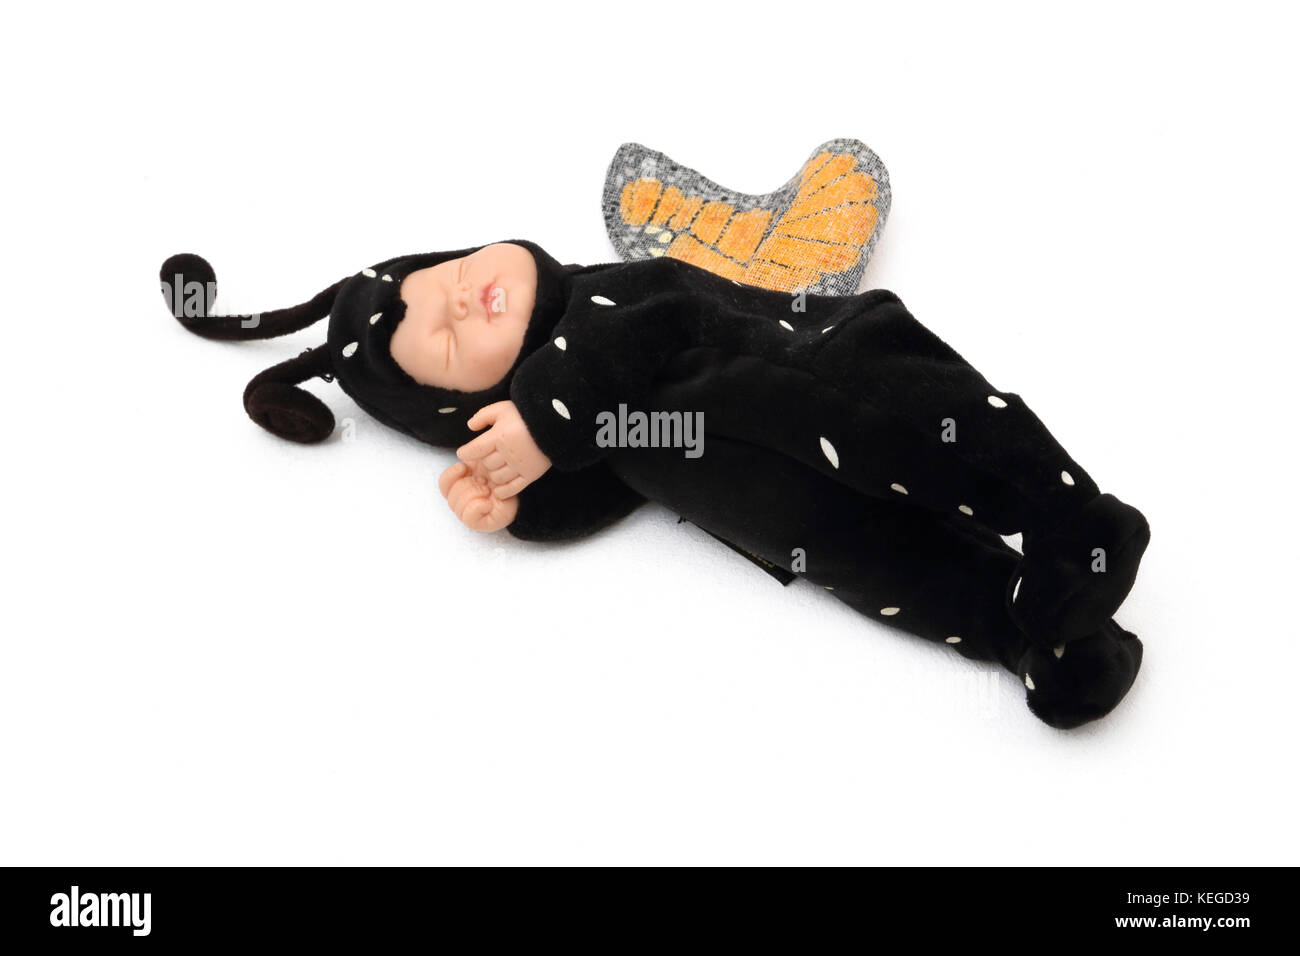 Baby Doll Toy in Butterfly Costume Stock Photo